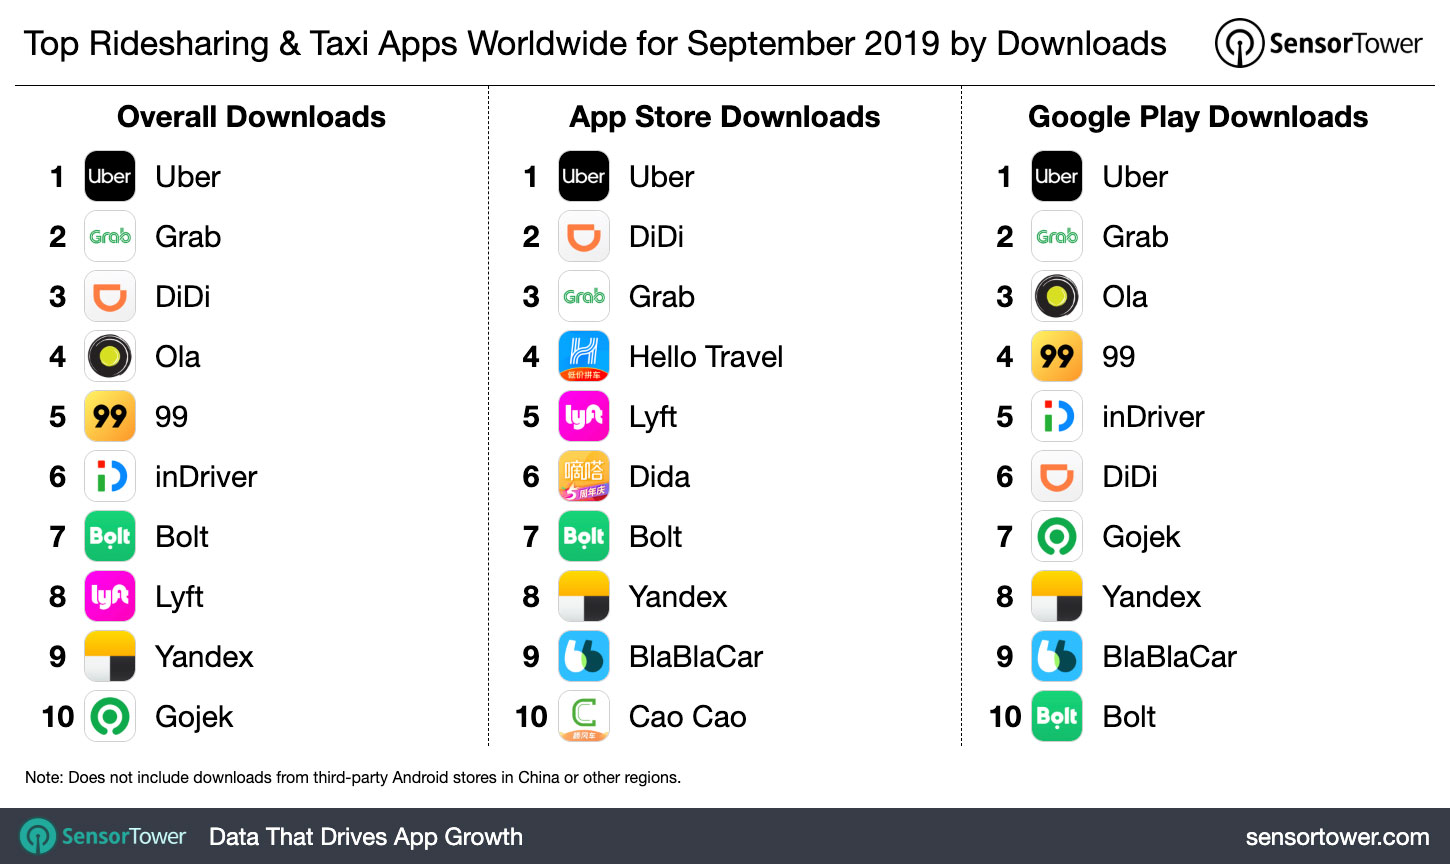 Top Ridesharing & Taxi Apps Worldwide for September 2019 by Downloads